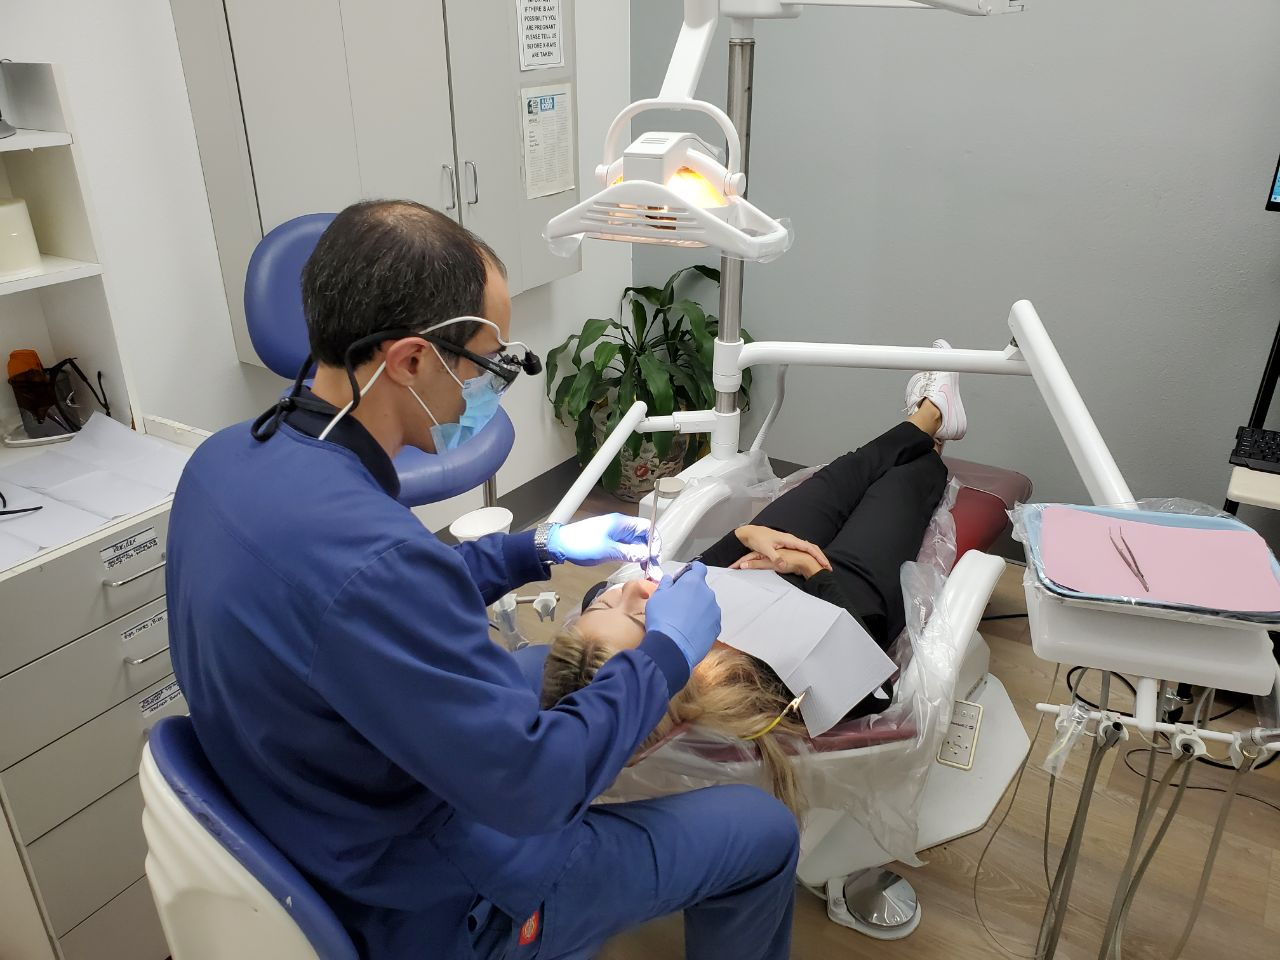 dental hygienist checking a patient with a dental emergency